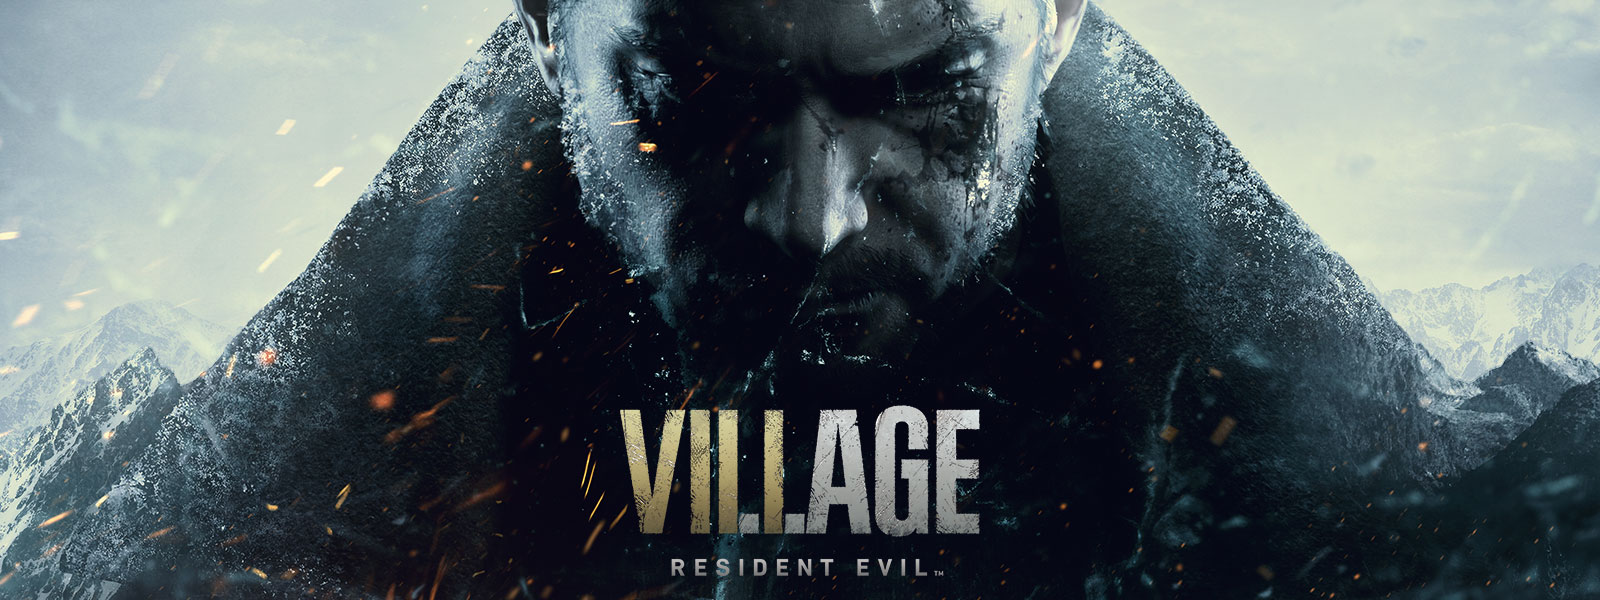 Resident Evil Village, Chris Redfield’s somber face on the side of a mountain